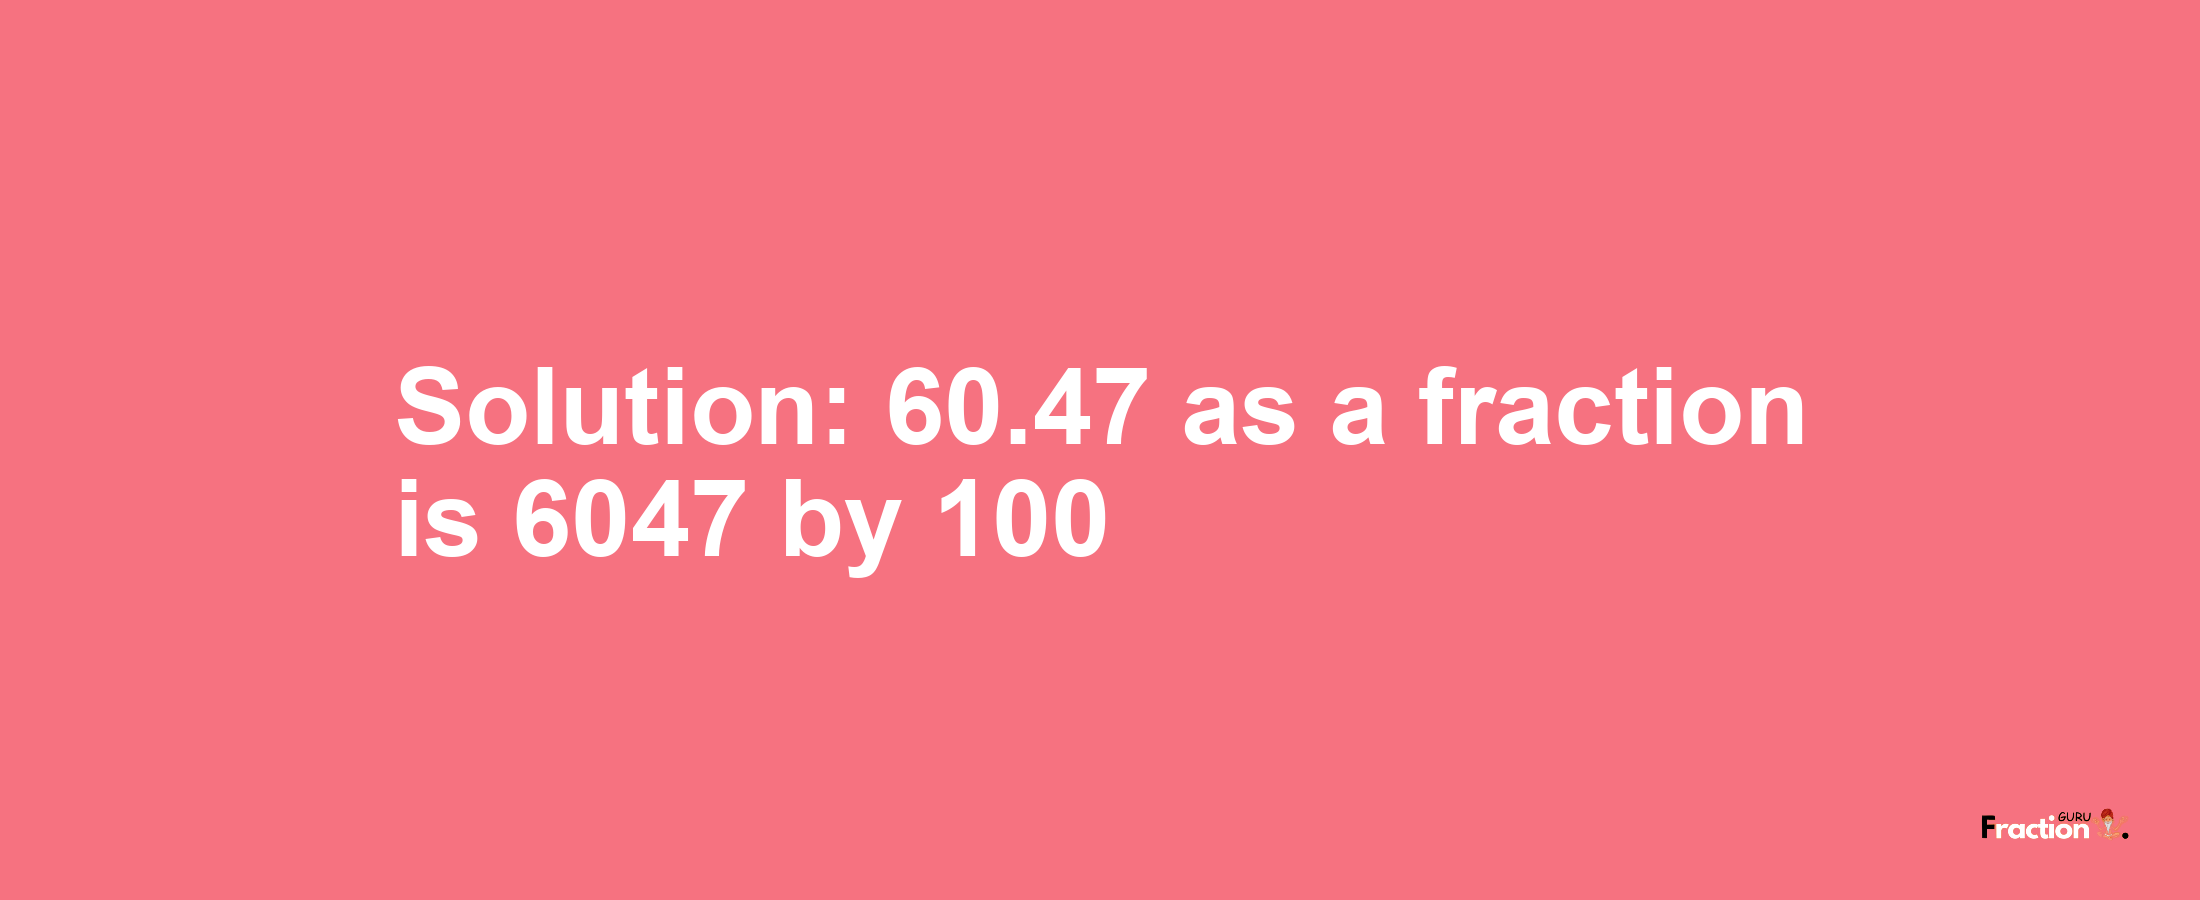 Solution:60.47 as a fraction is 6047/100